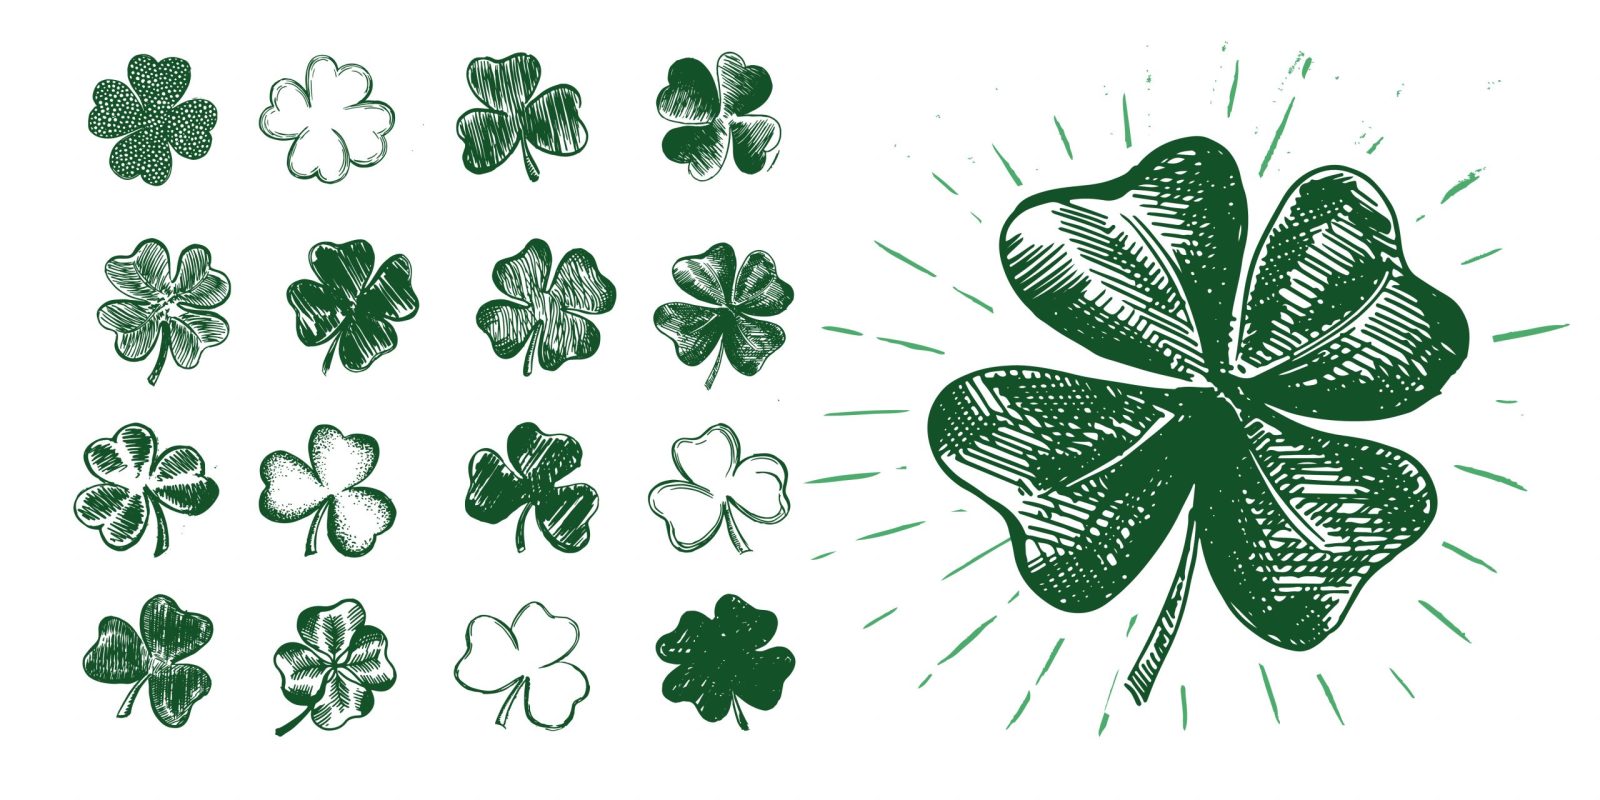 7 Four-Leaf Clover Facts to Know for St. Patrick's Day